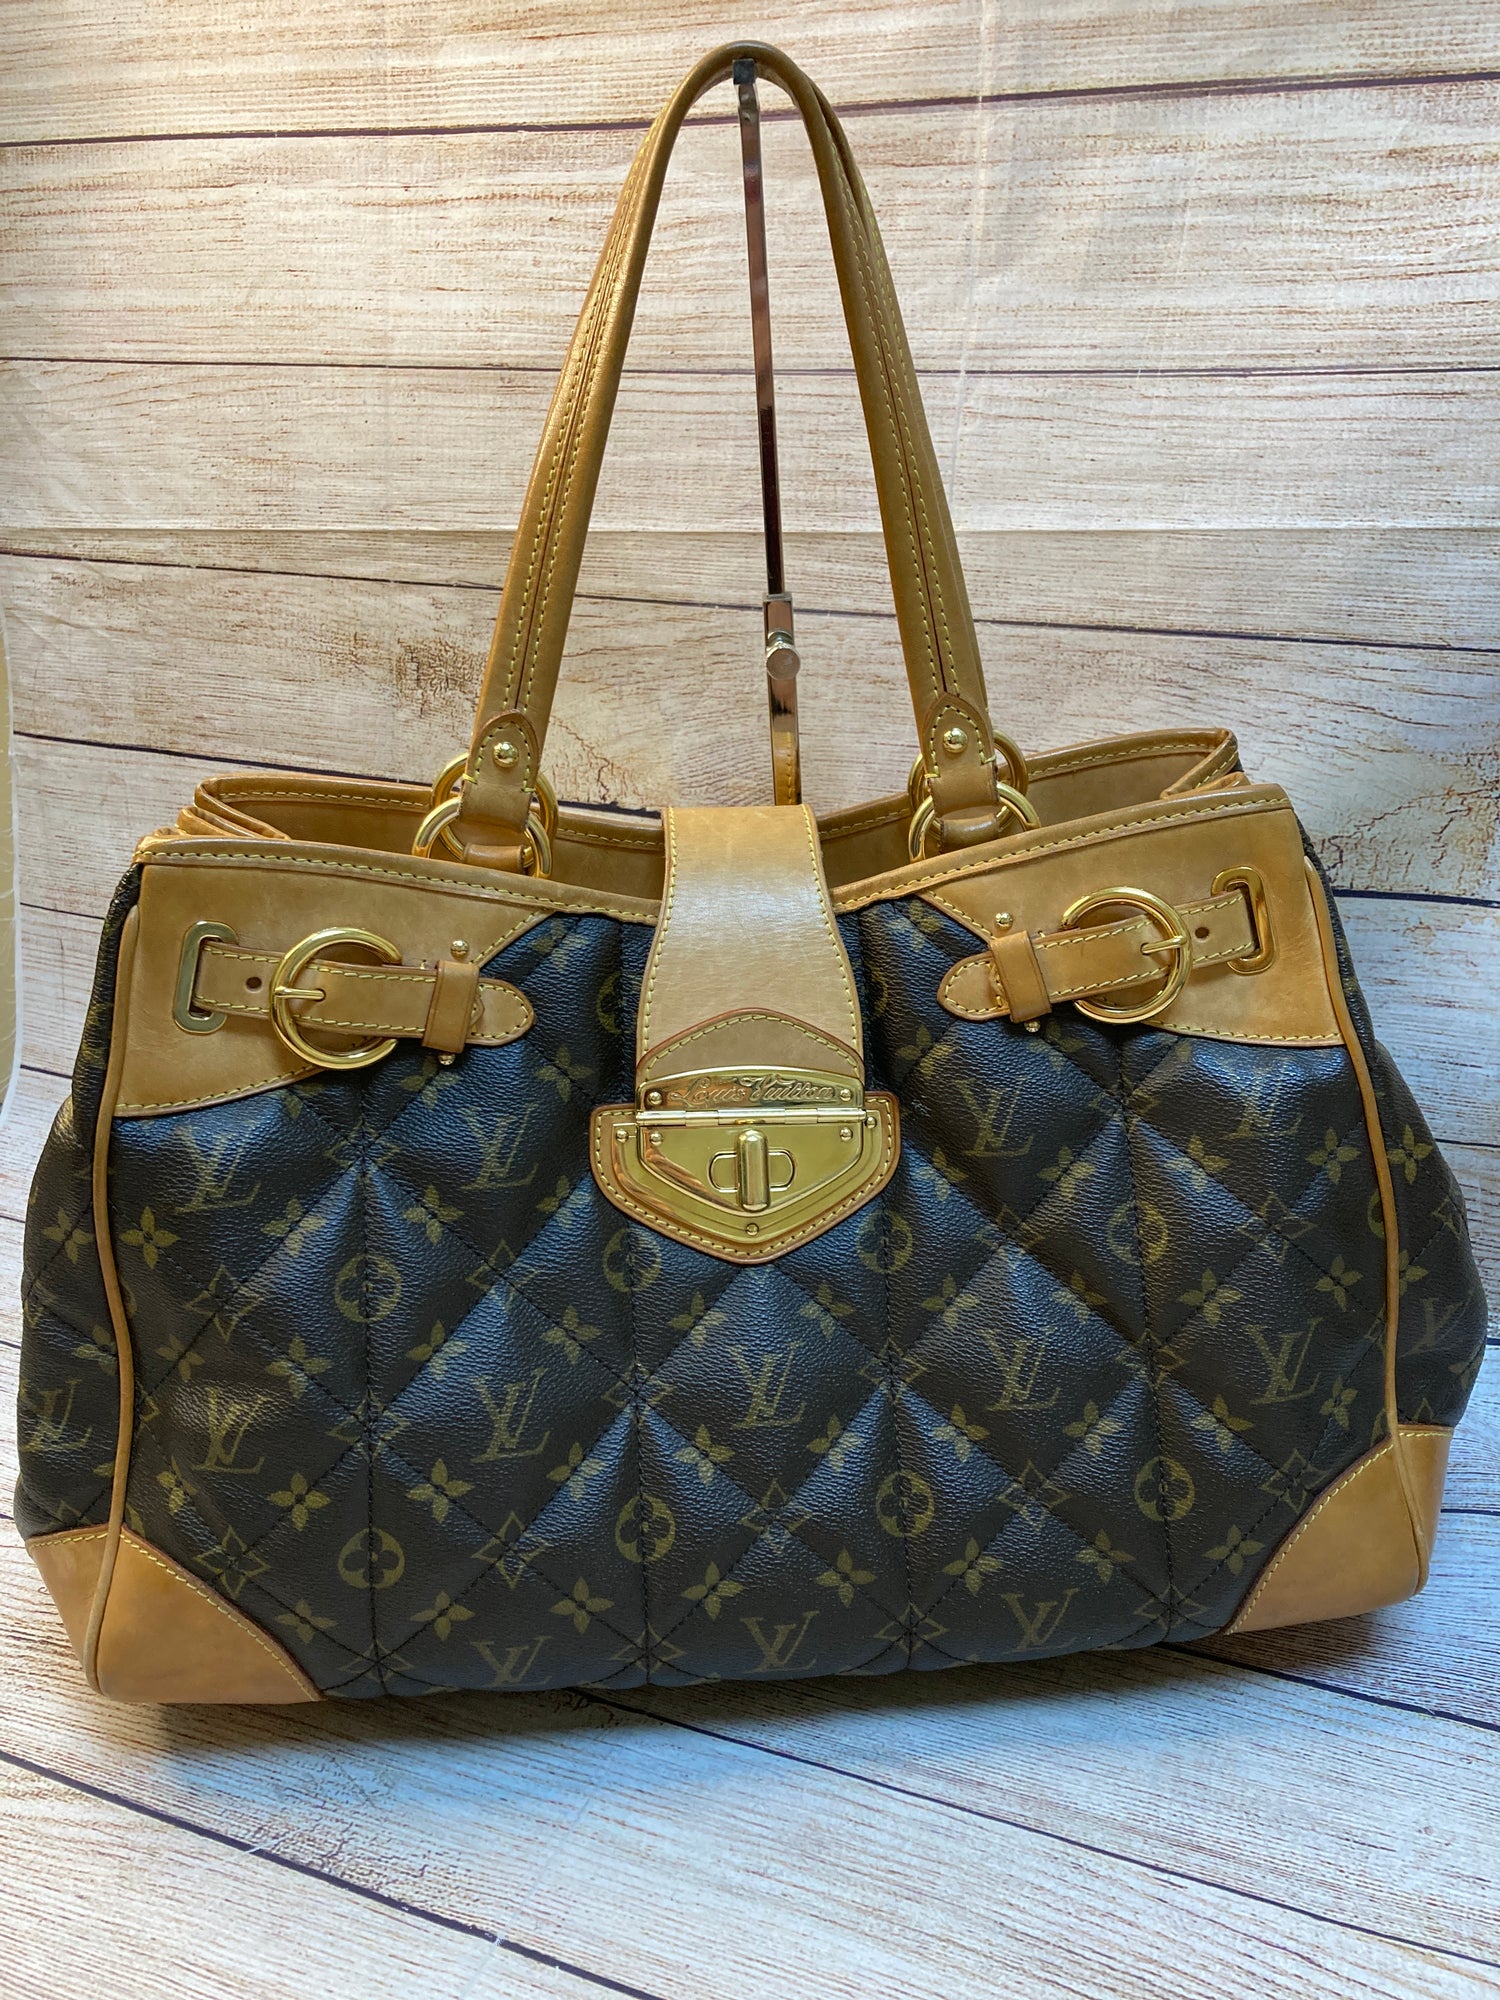 Clothes Mentor - Littleton - Start your week off in the ultimate designer  style! Shop Clothes Mentor Littleton ànd make your designer handbag dreams  come true today with this luxurious YSL Uptown